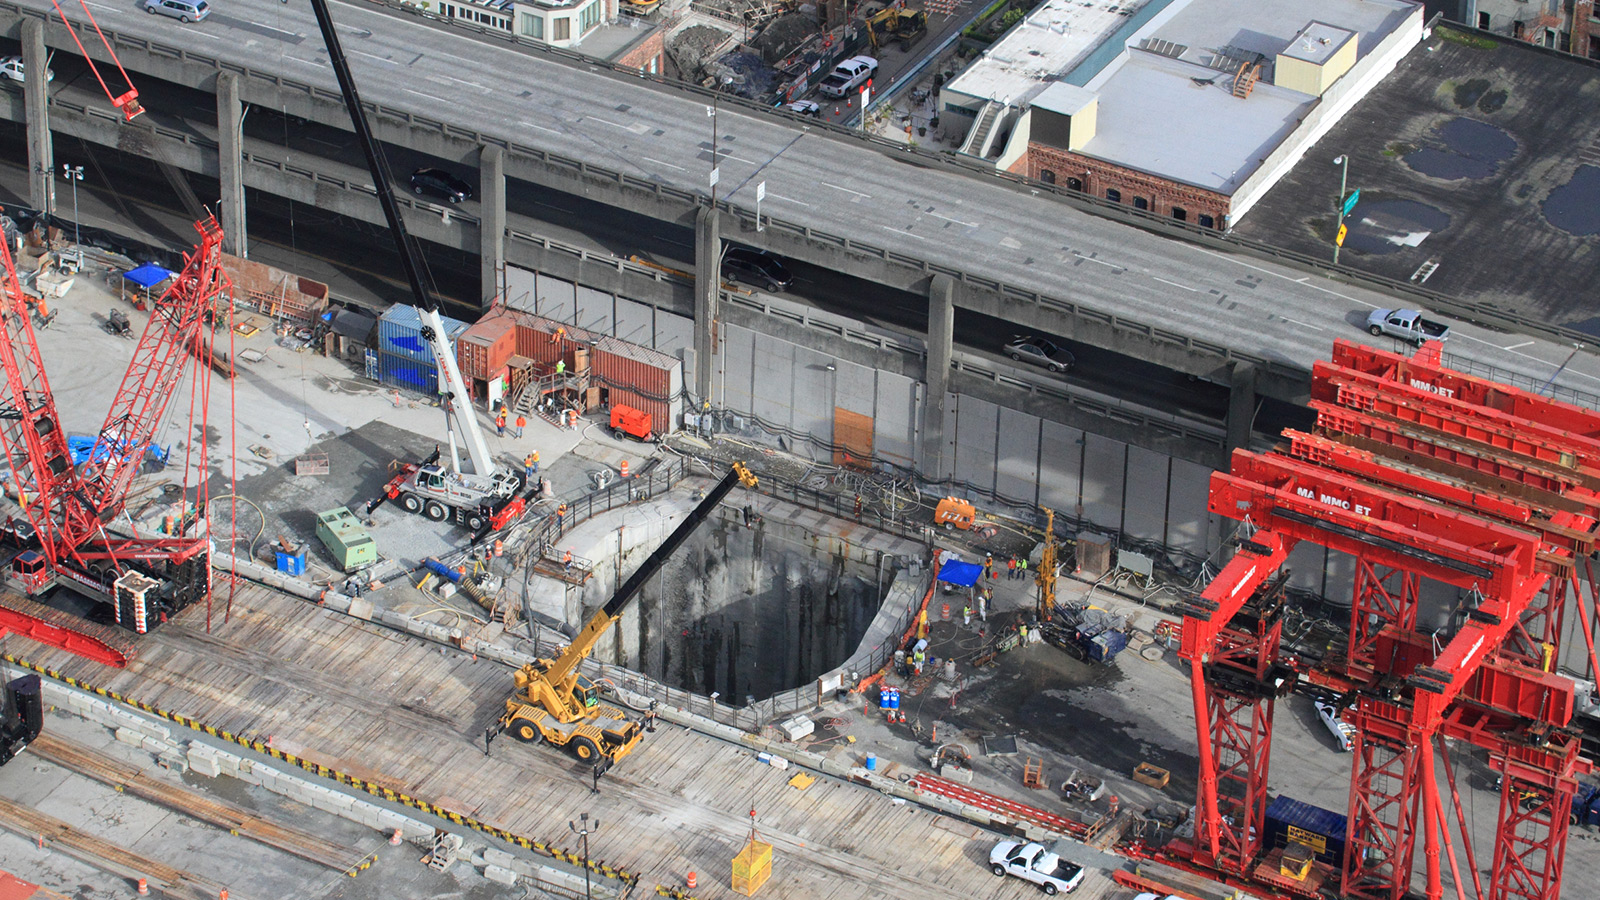 Feb. 13, 2015, aerial photo of the 120-foot-deep pit crews will use to access and repair Bertha, the SR 99 tunneling machine.